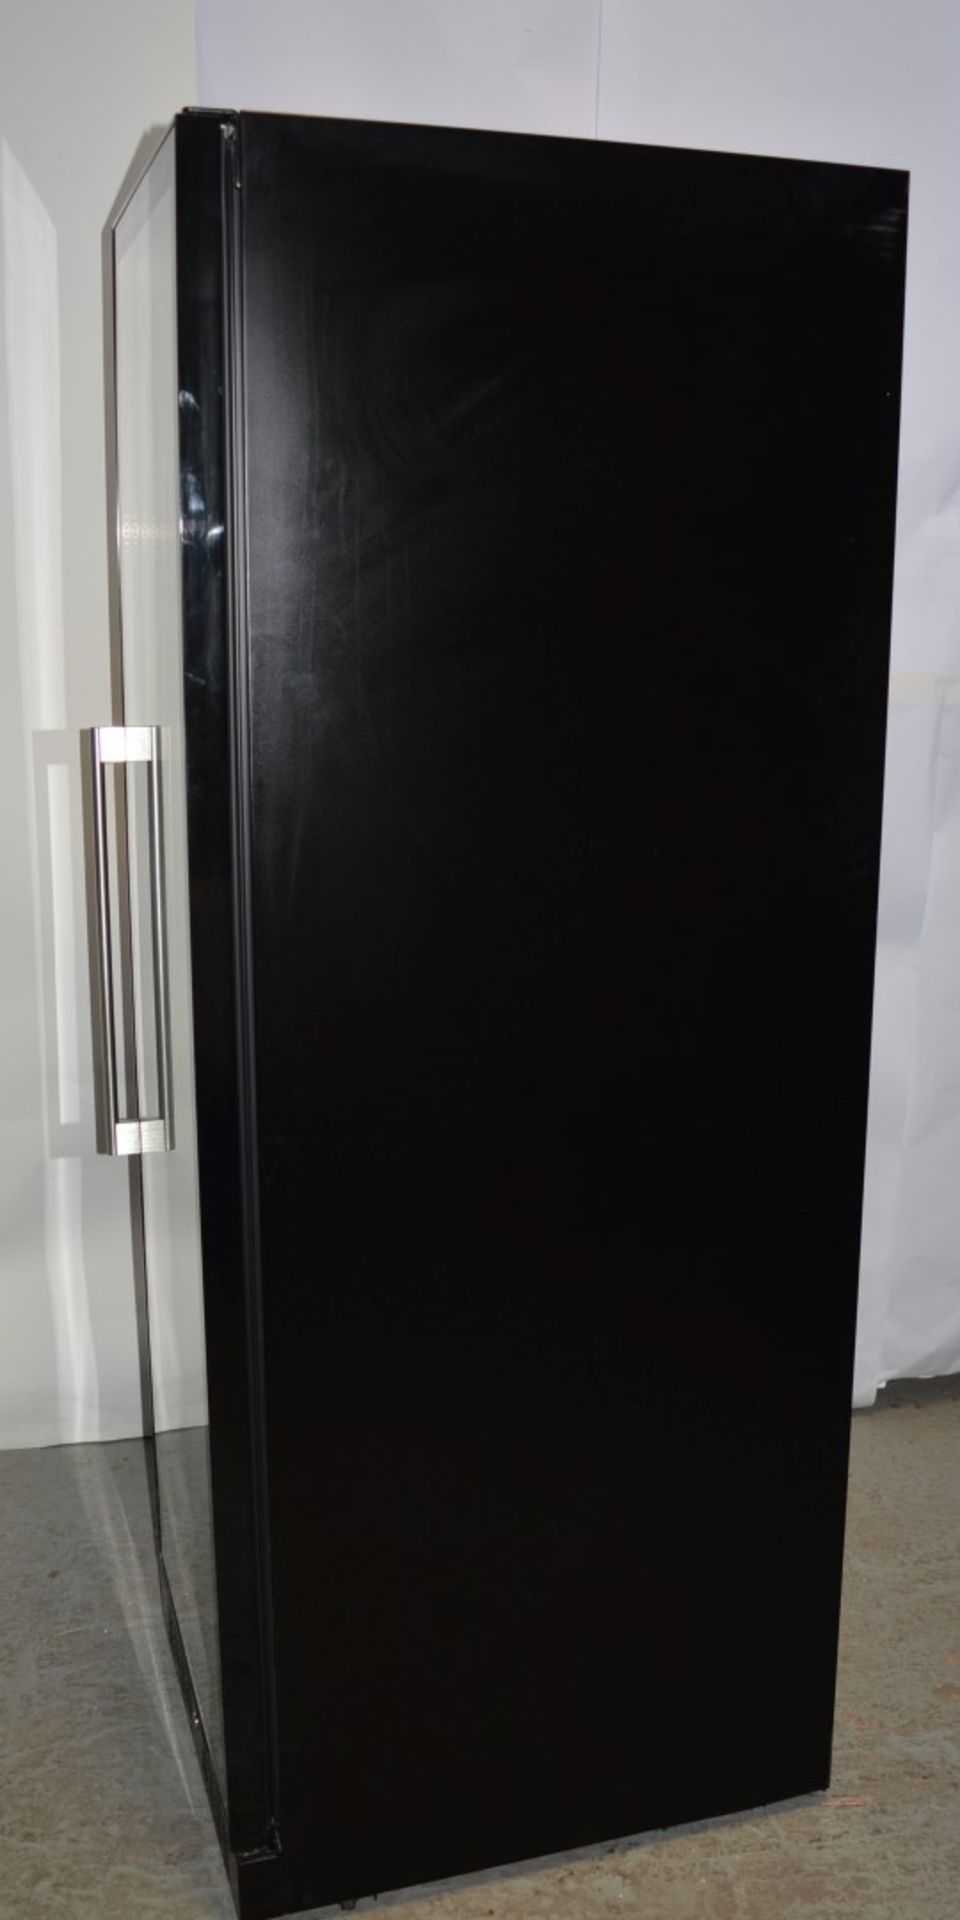 1 x Caple Freestanding Wine Chiller Cabinet - Model WF1547 - Height 176cm - Features Black Glass - Image 4 of 18